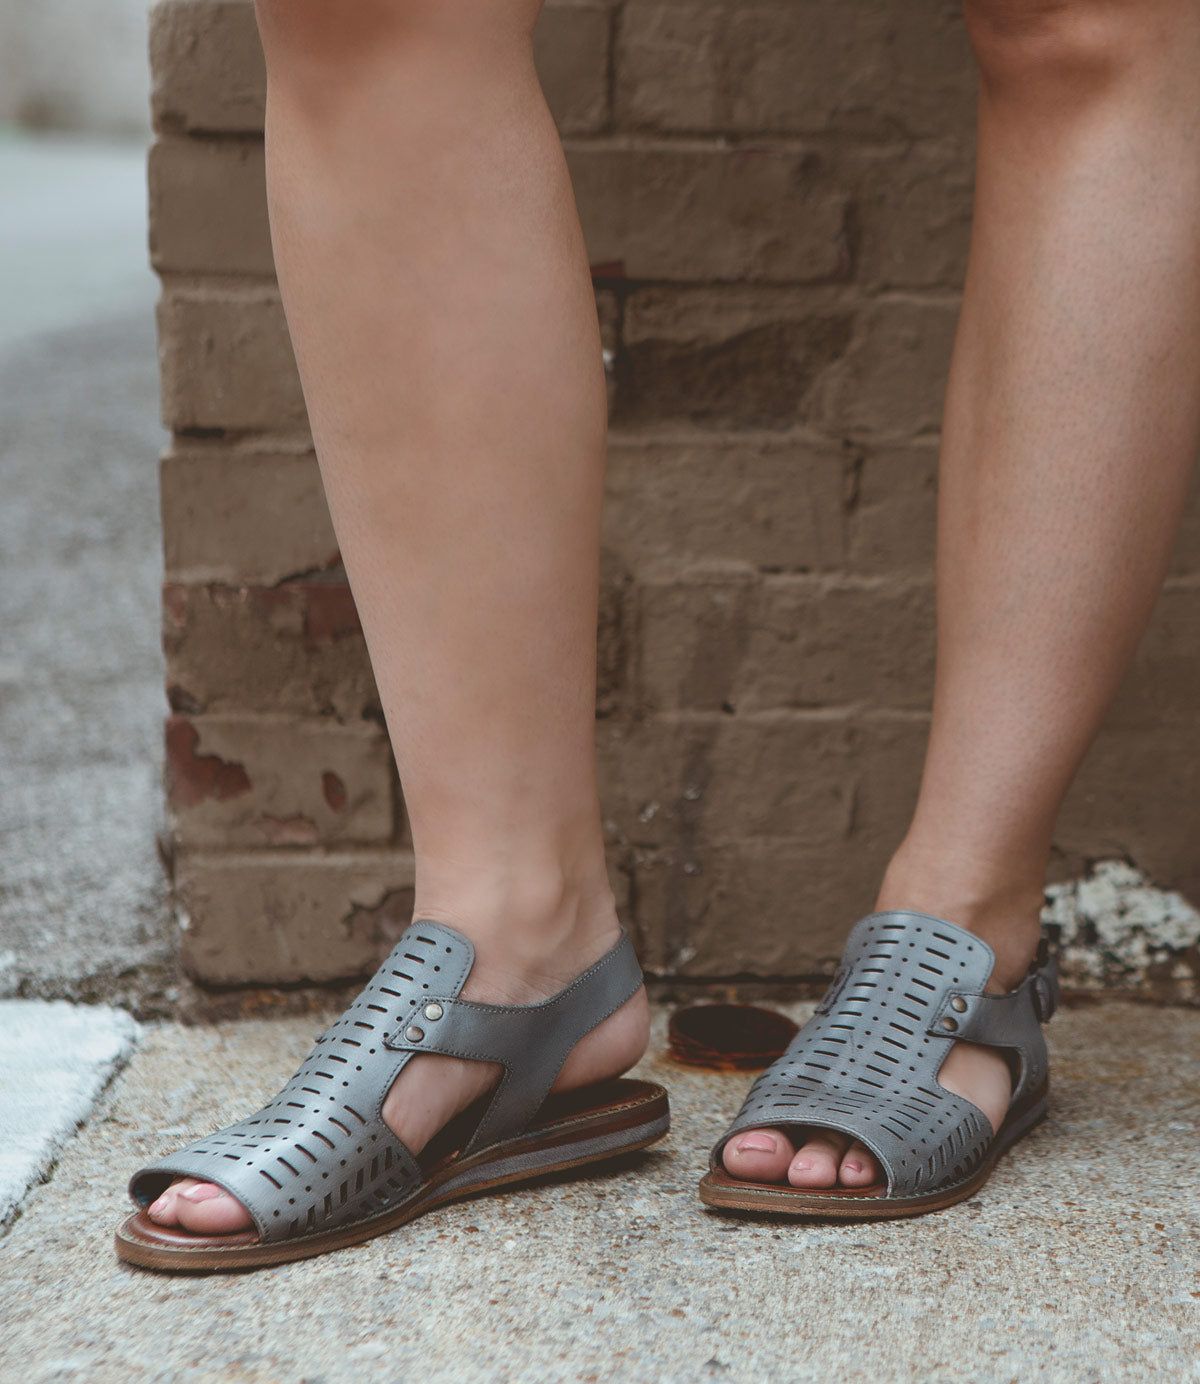 A person wearing gray, open-toed Roan Ballad II sandals with cut-out designs and an adjustable ankle closure stands on a concrete surface near a brick wall.